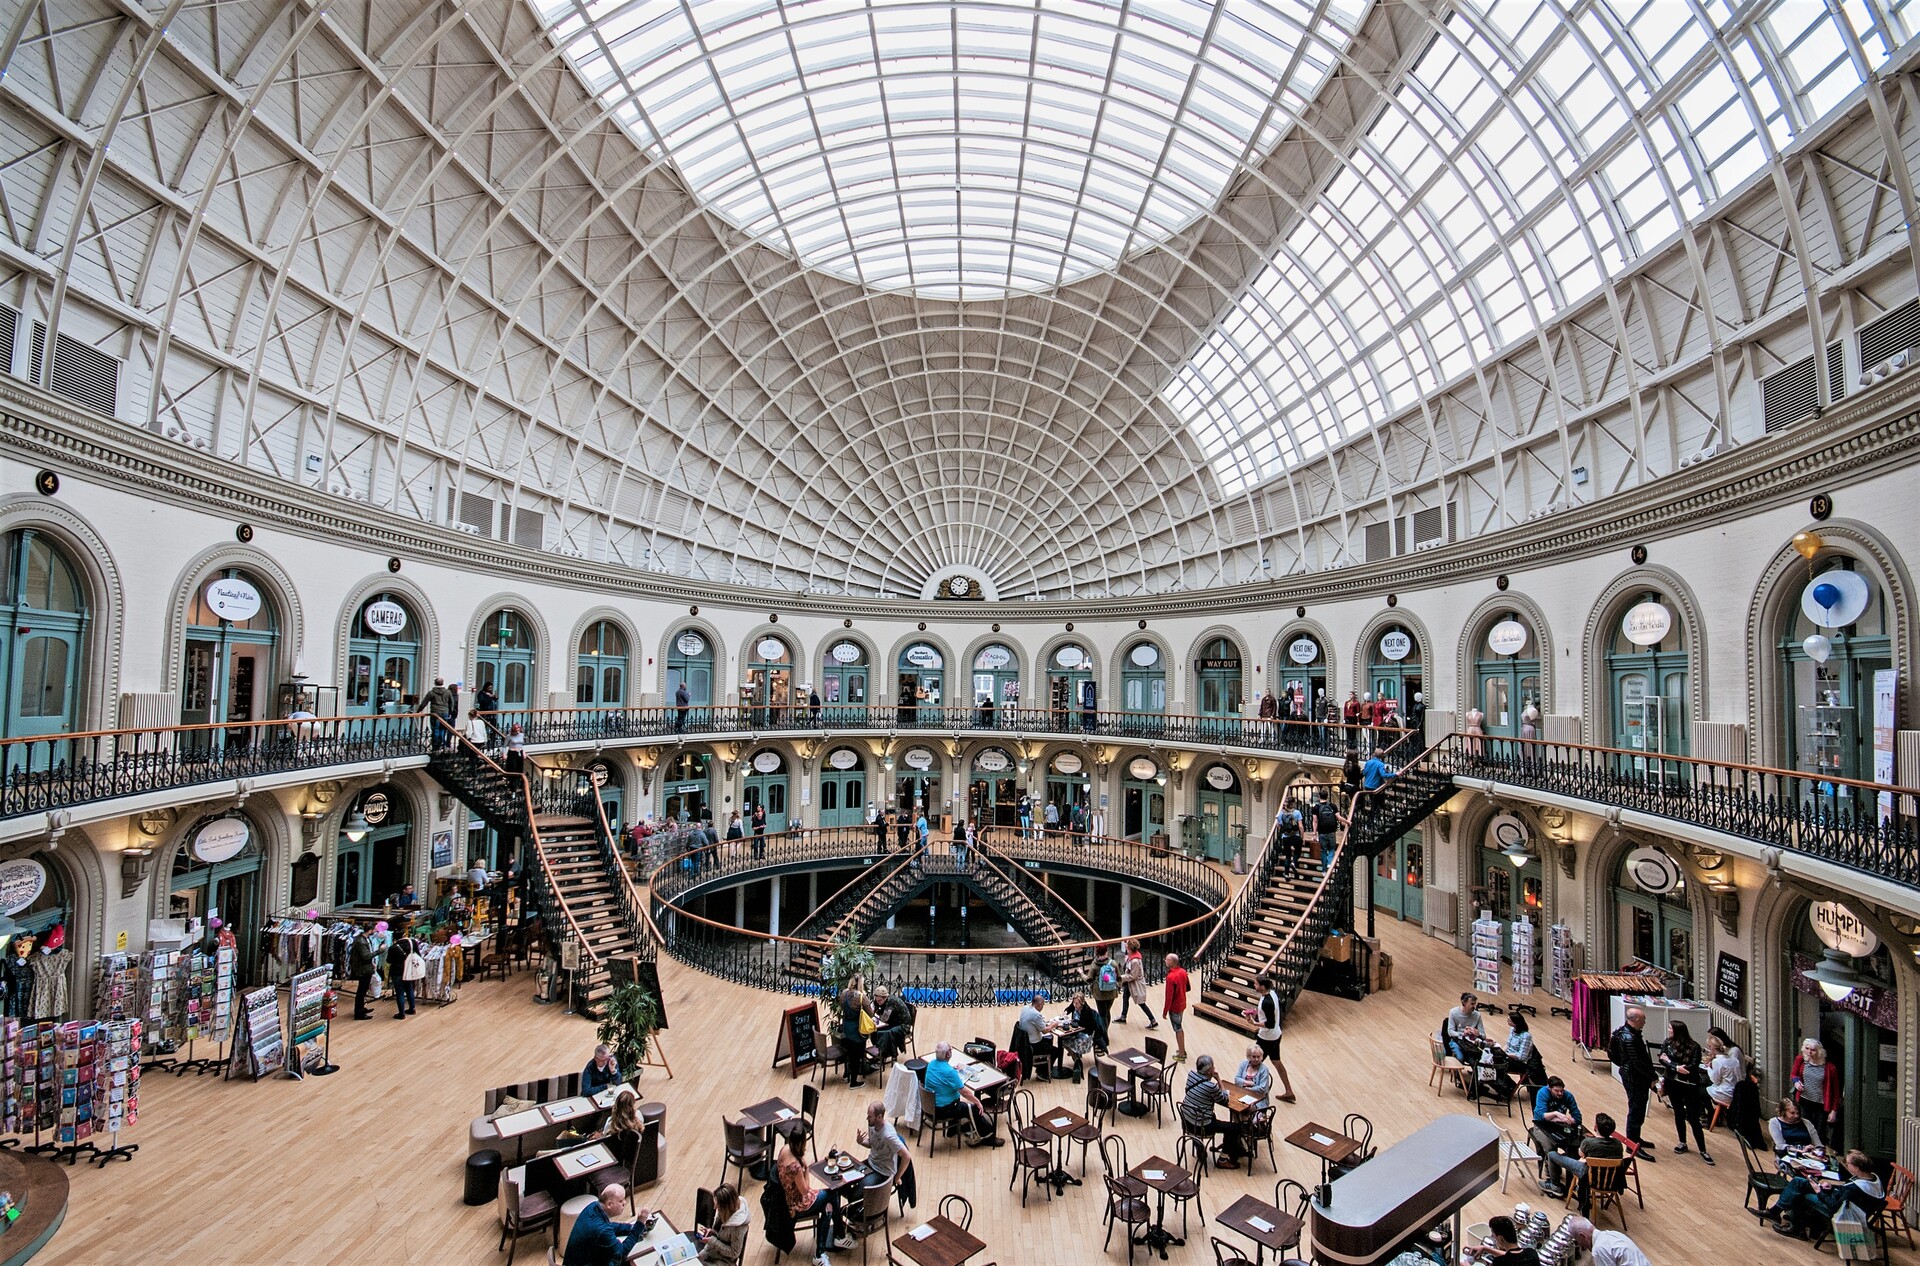 Top 15 Leeds Attractions The best things to do and see in Leeds